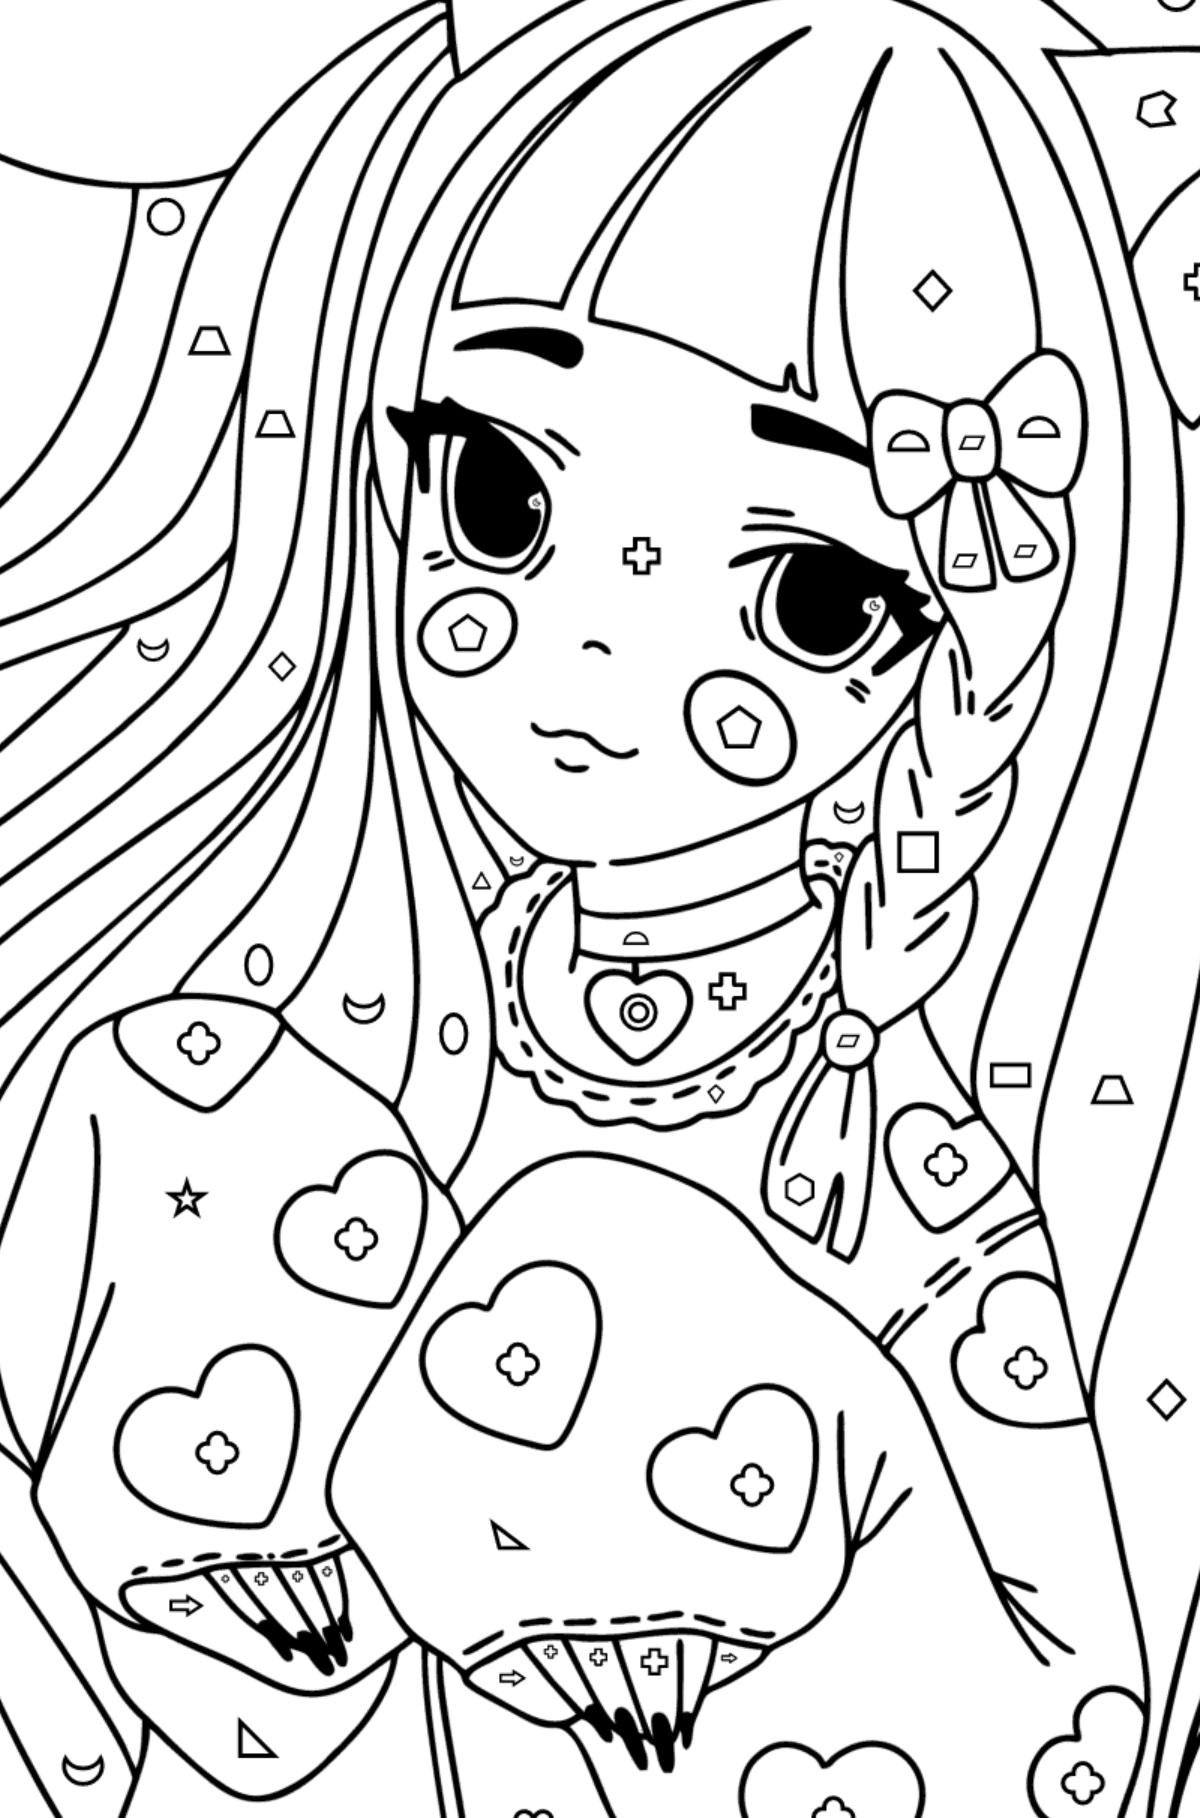 Anime girl with ears and paws coloring page - Coloring by Geometric Shapes for Kids